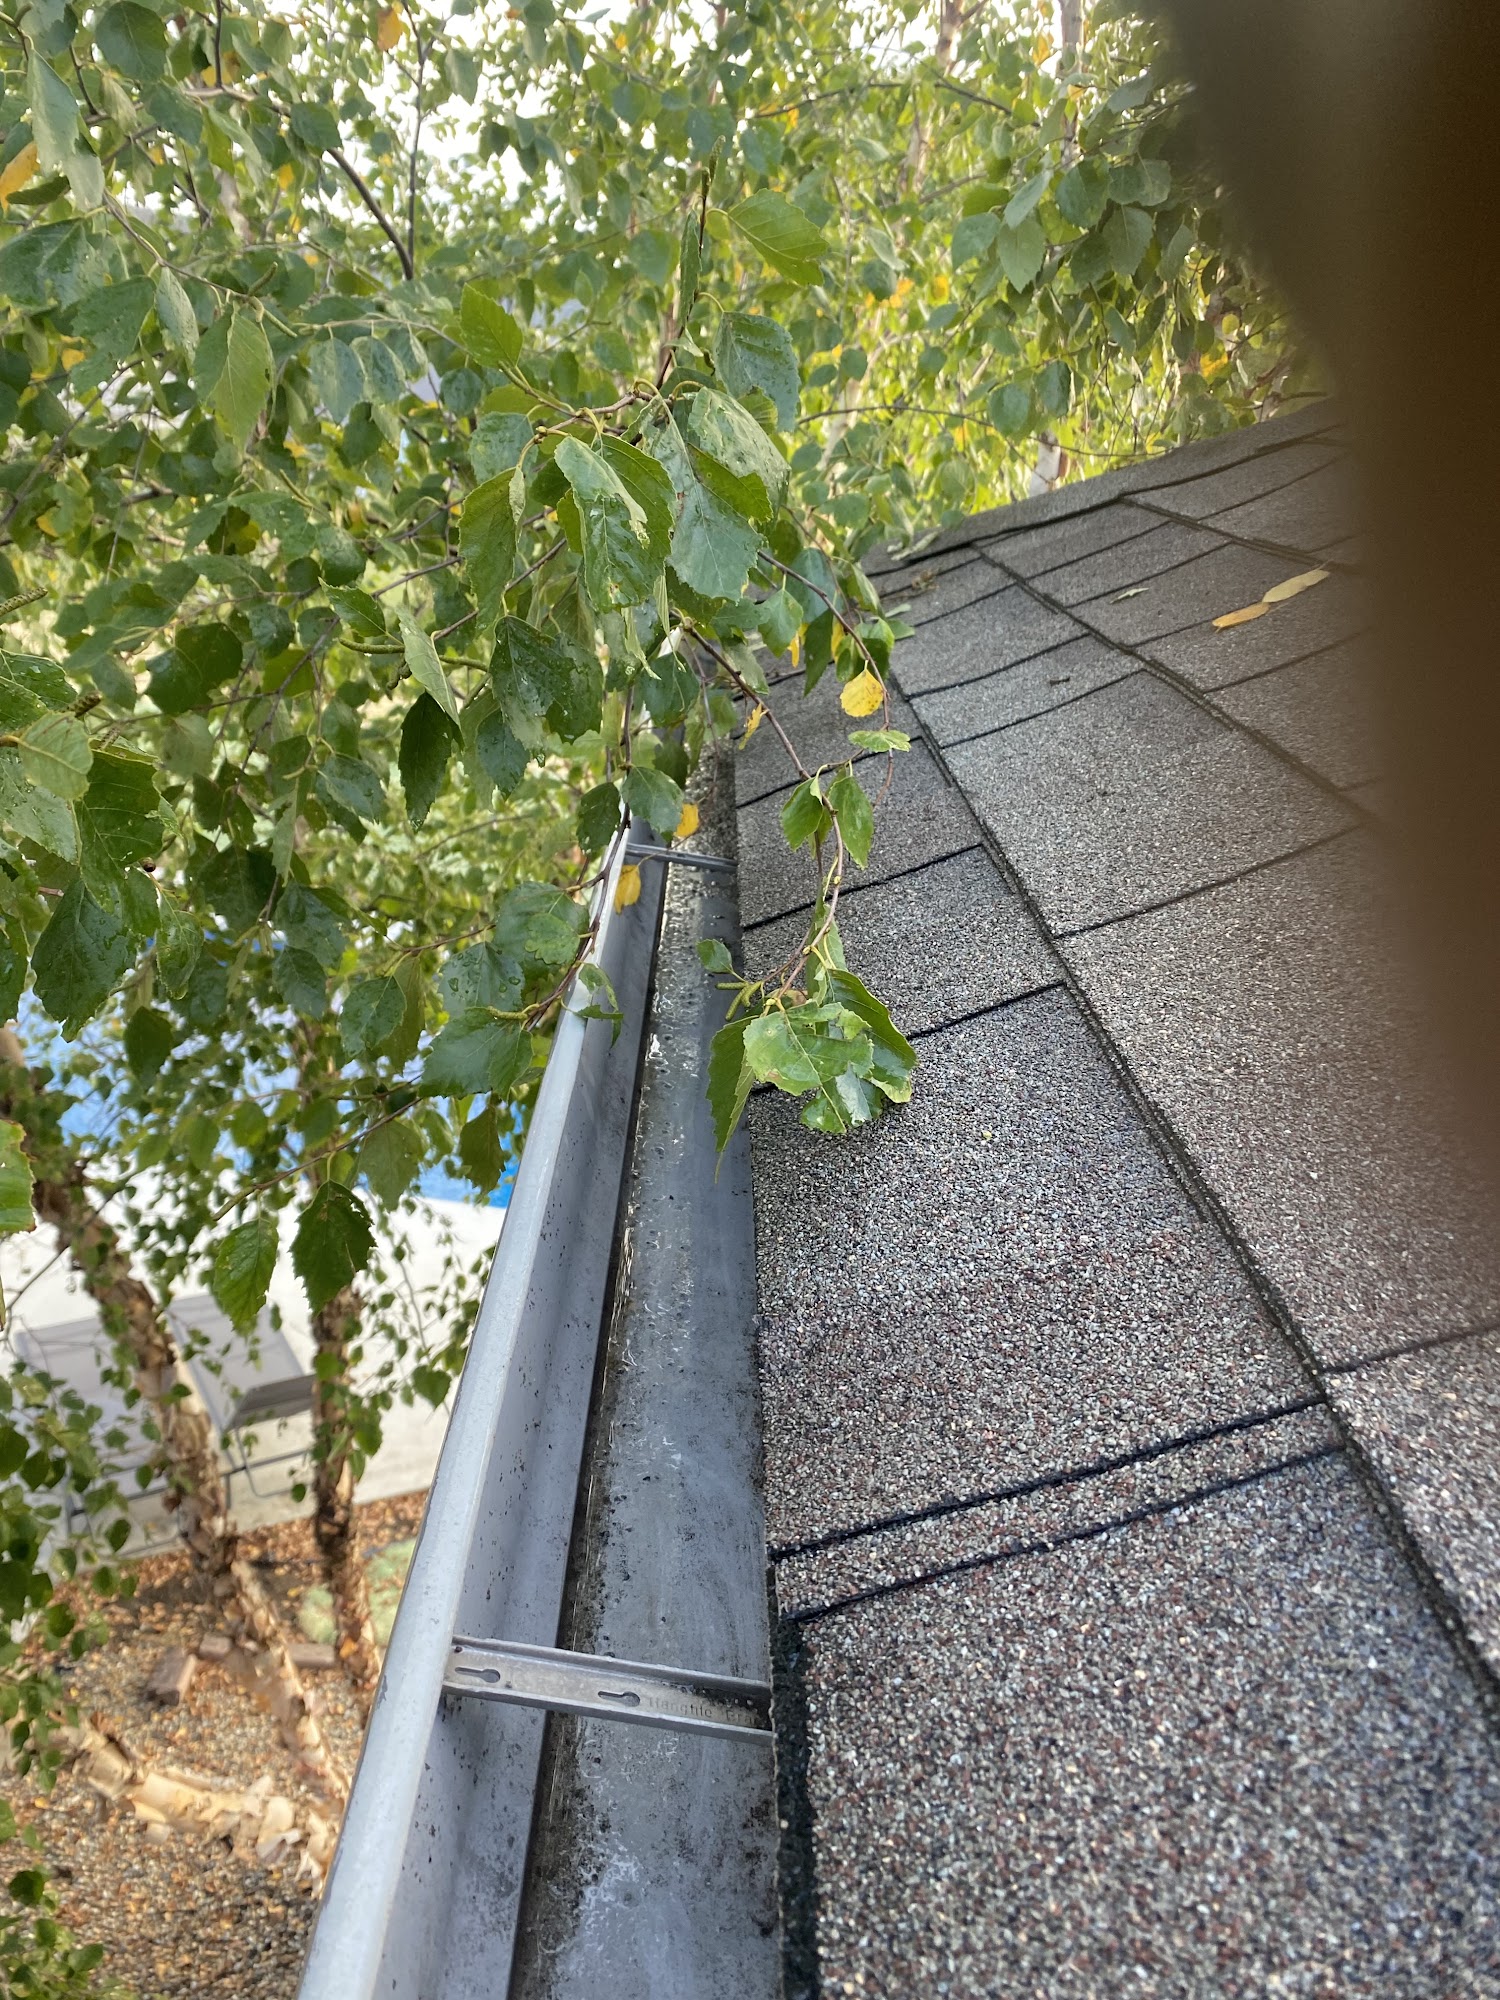 Priority Gutter Cleaning 12403 Shoemaker Rd, Excelsior Springs Missouri 64024